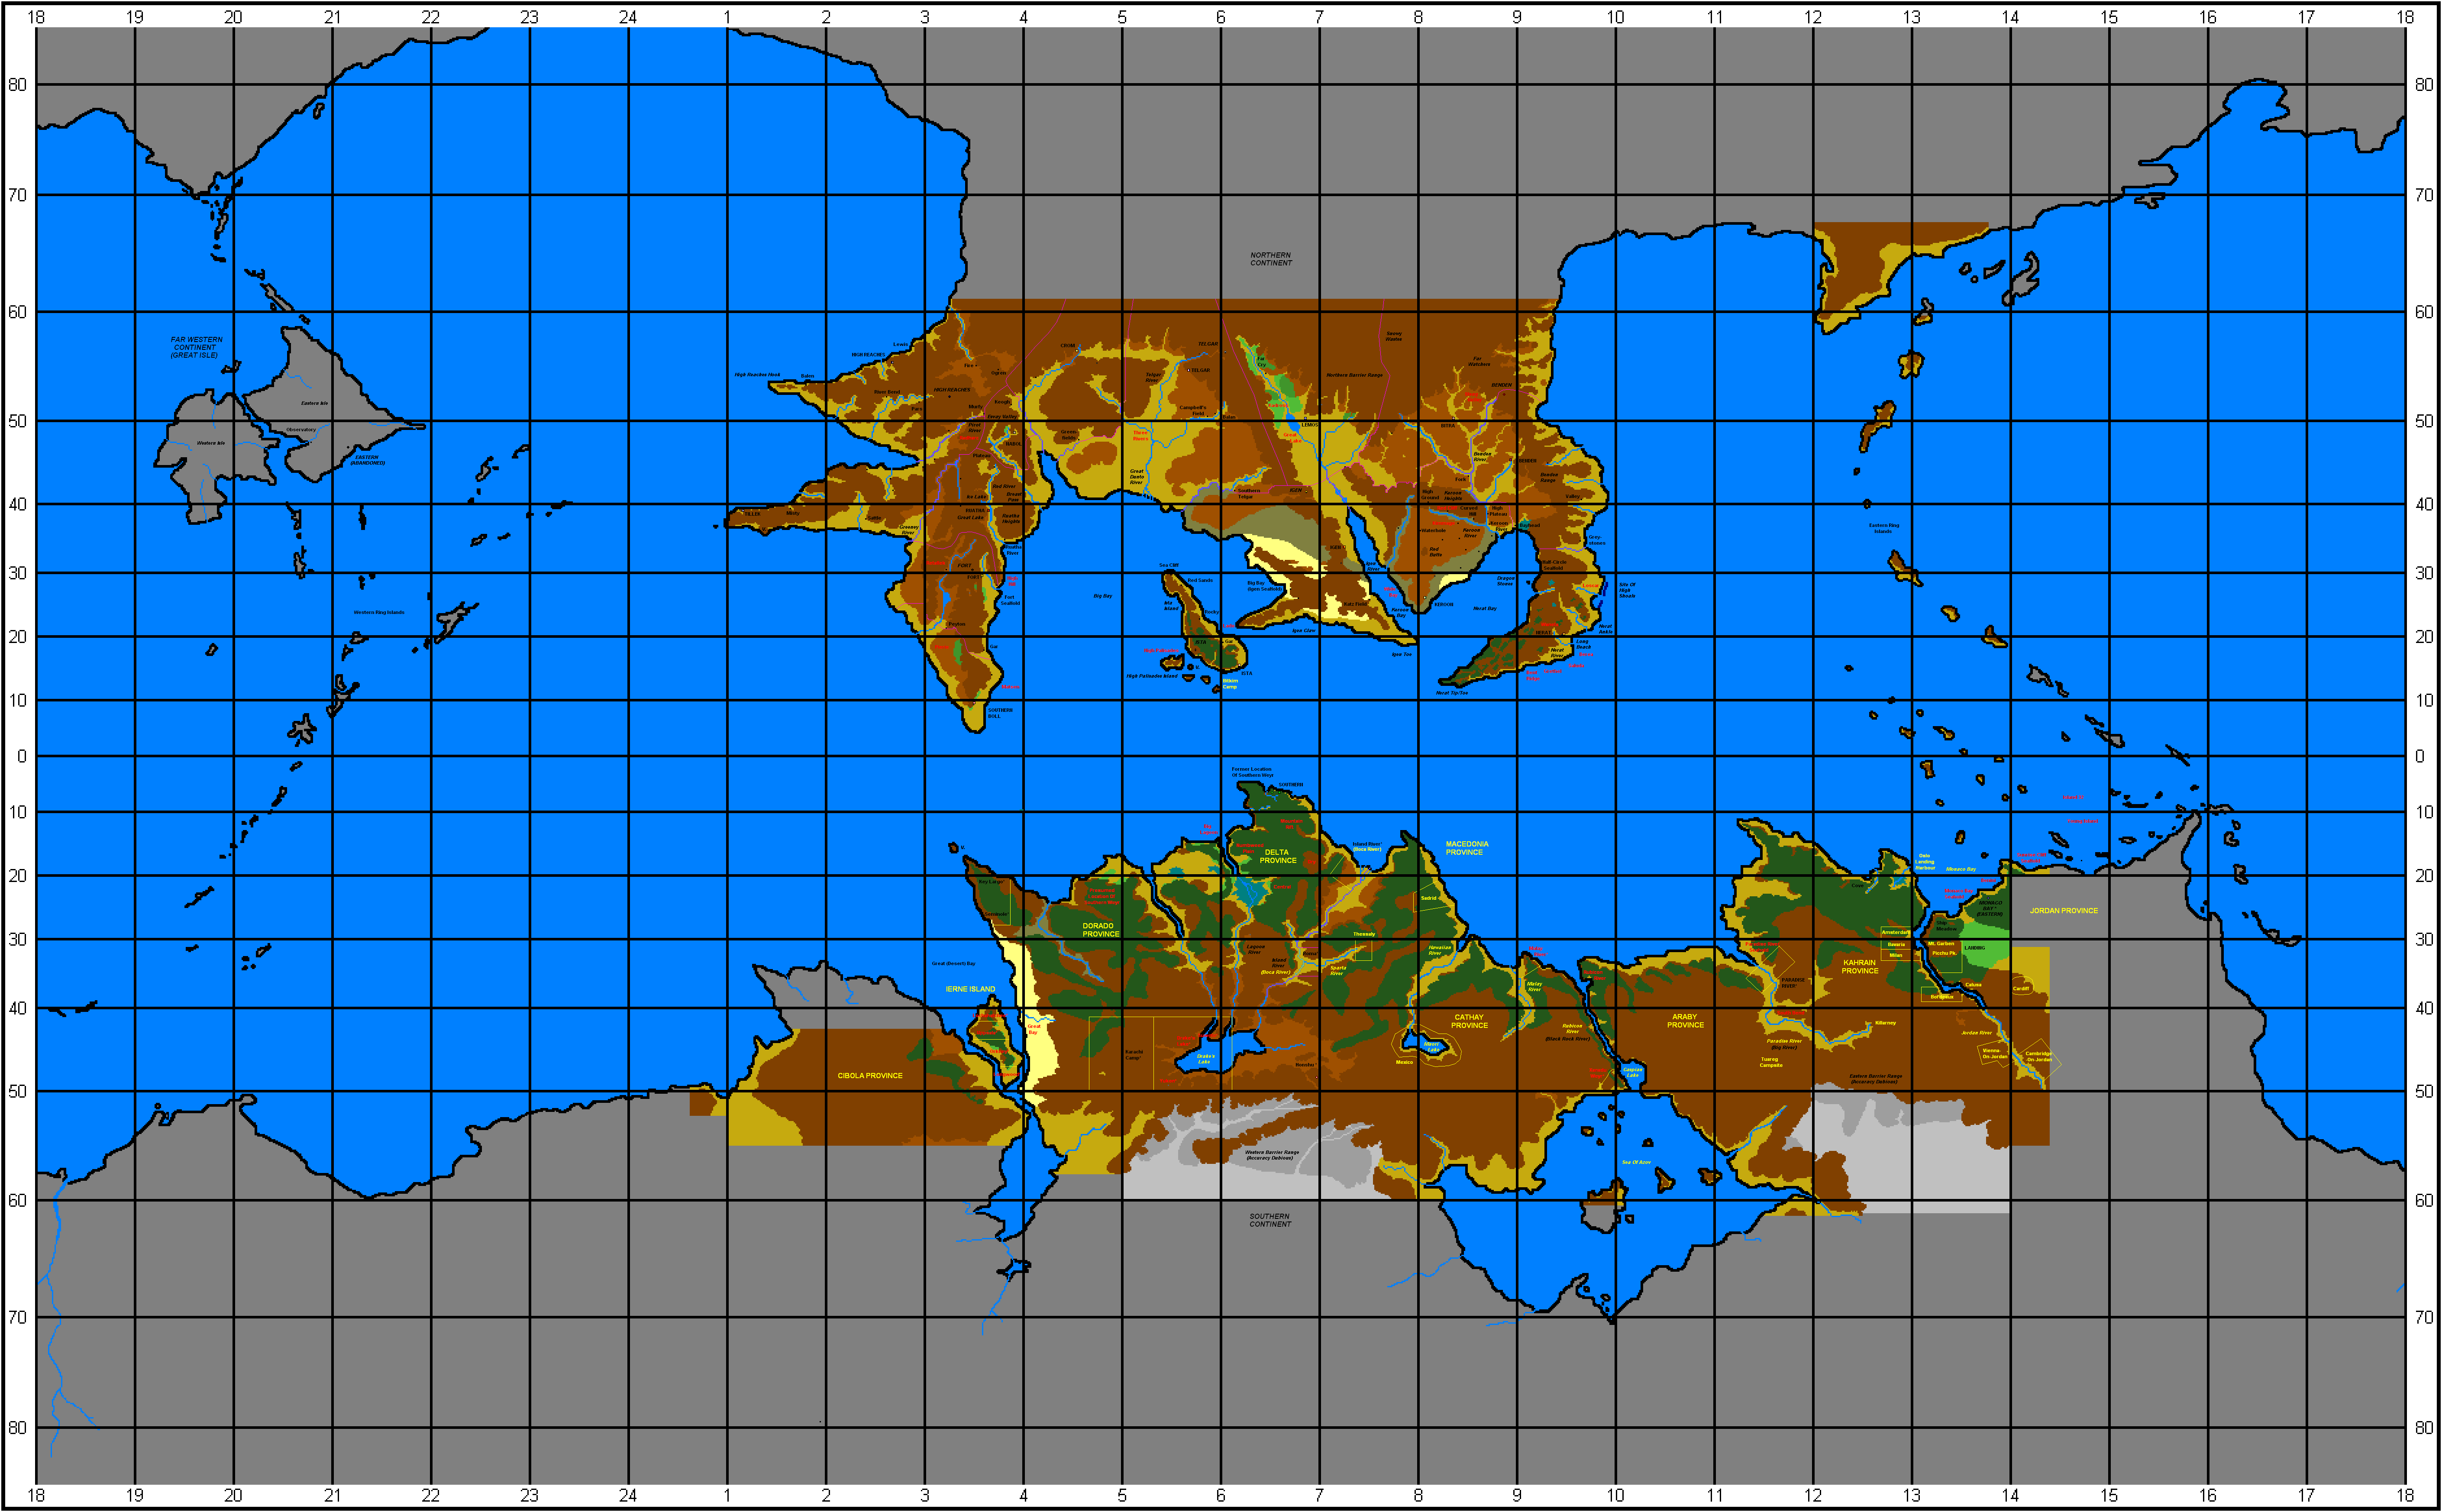 Pern Map - Current Stage